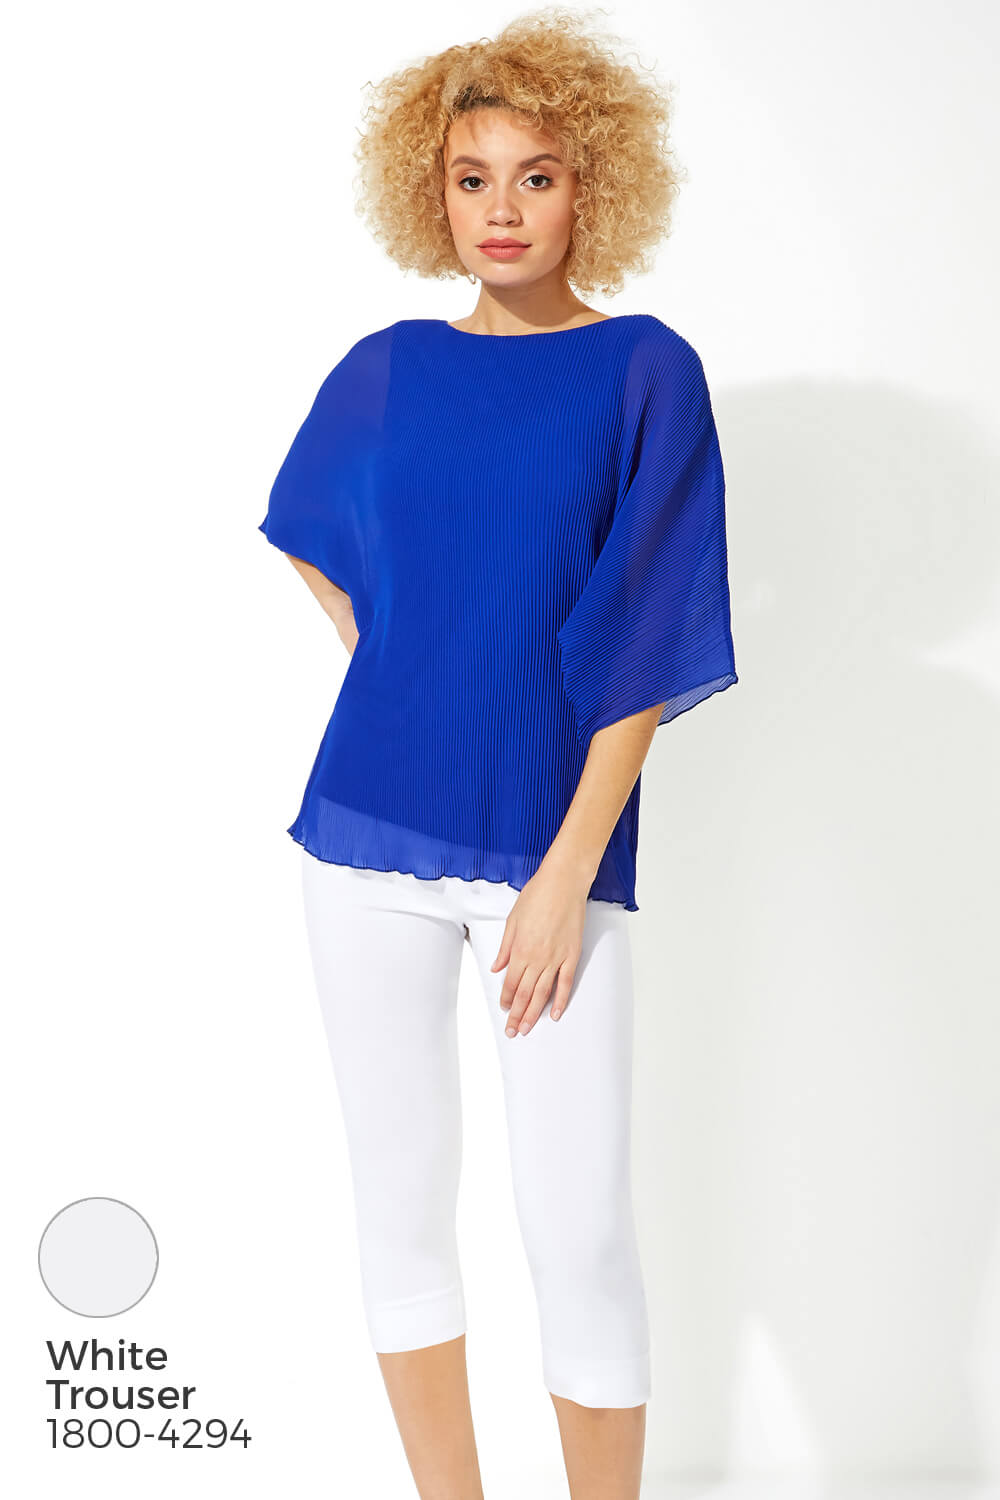 Royal Blue Pleated Chiffon Overlay Top, Image 5 of 8